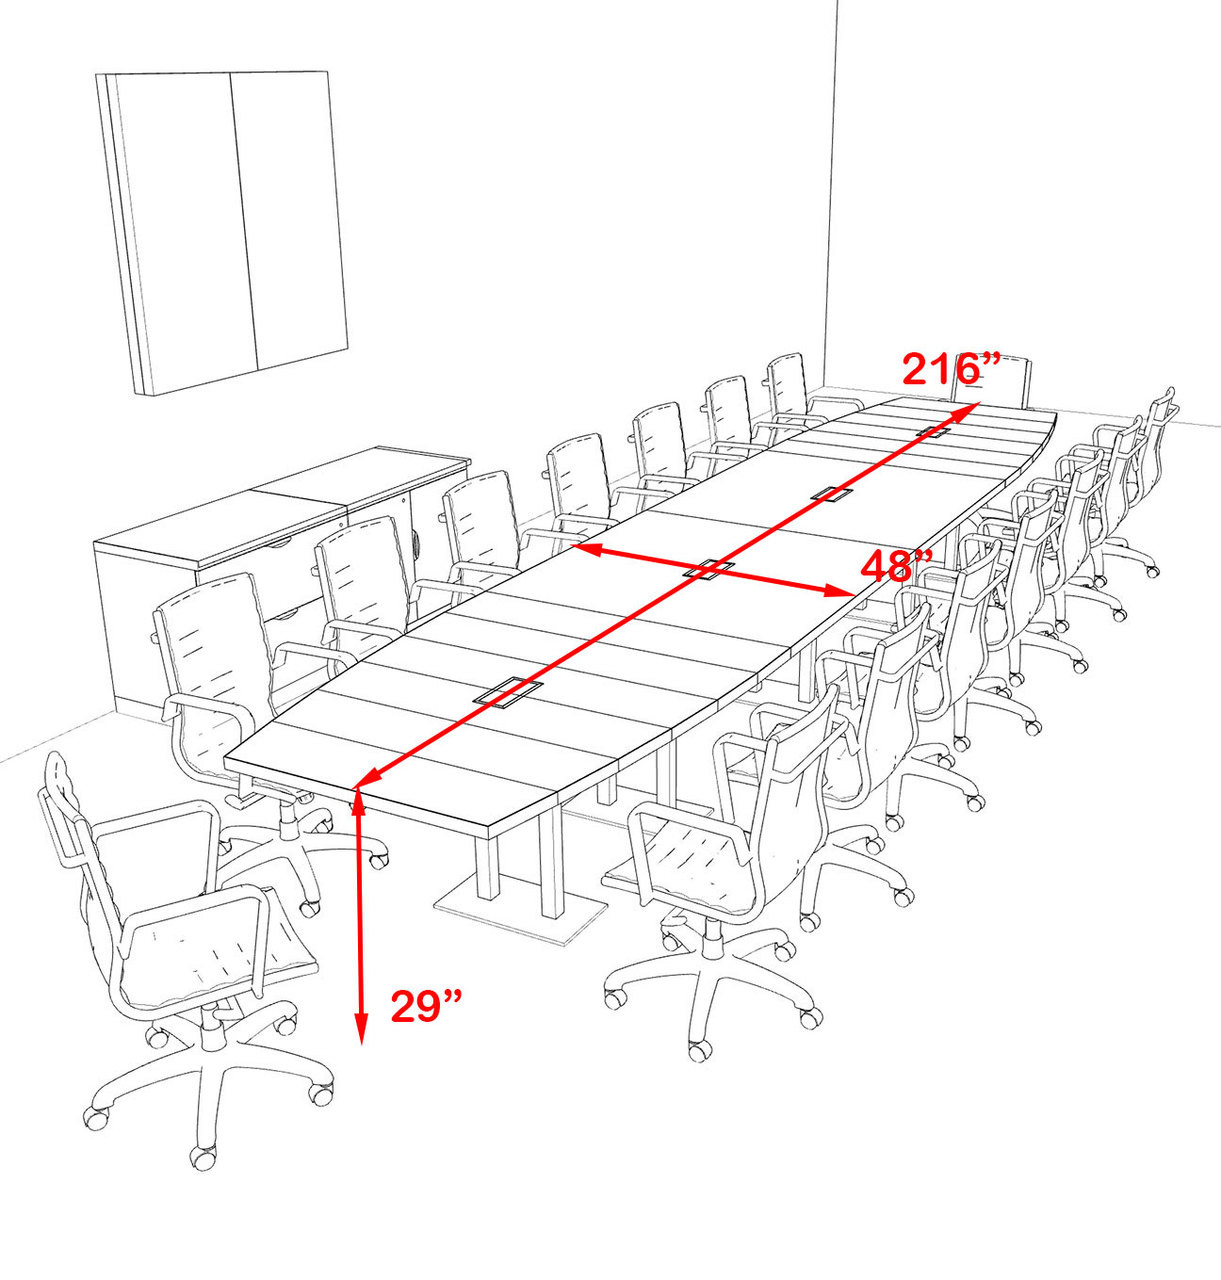 Modern Boat Shaped Steel Leg 18' Feet Conference Table, #OF-CON-CM47